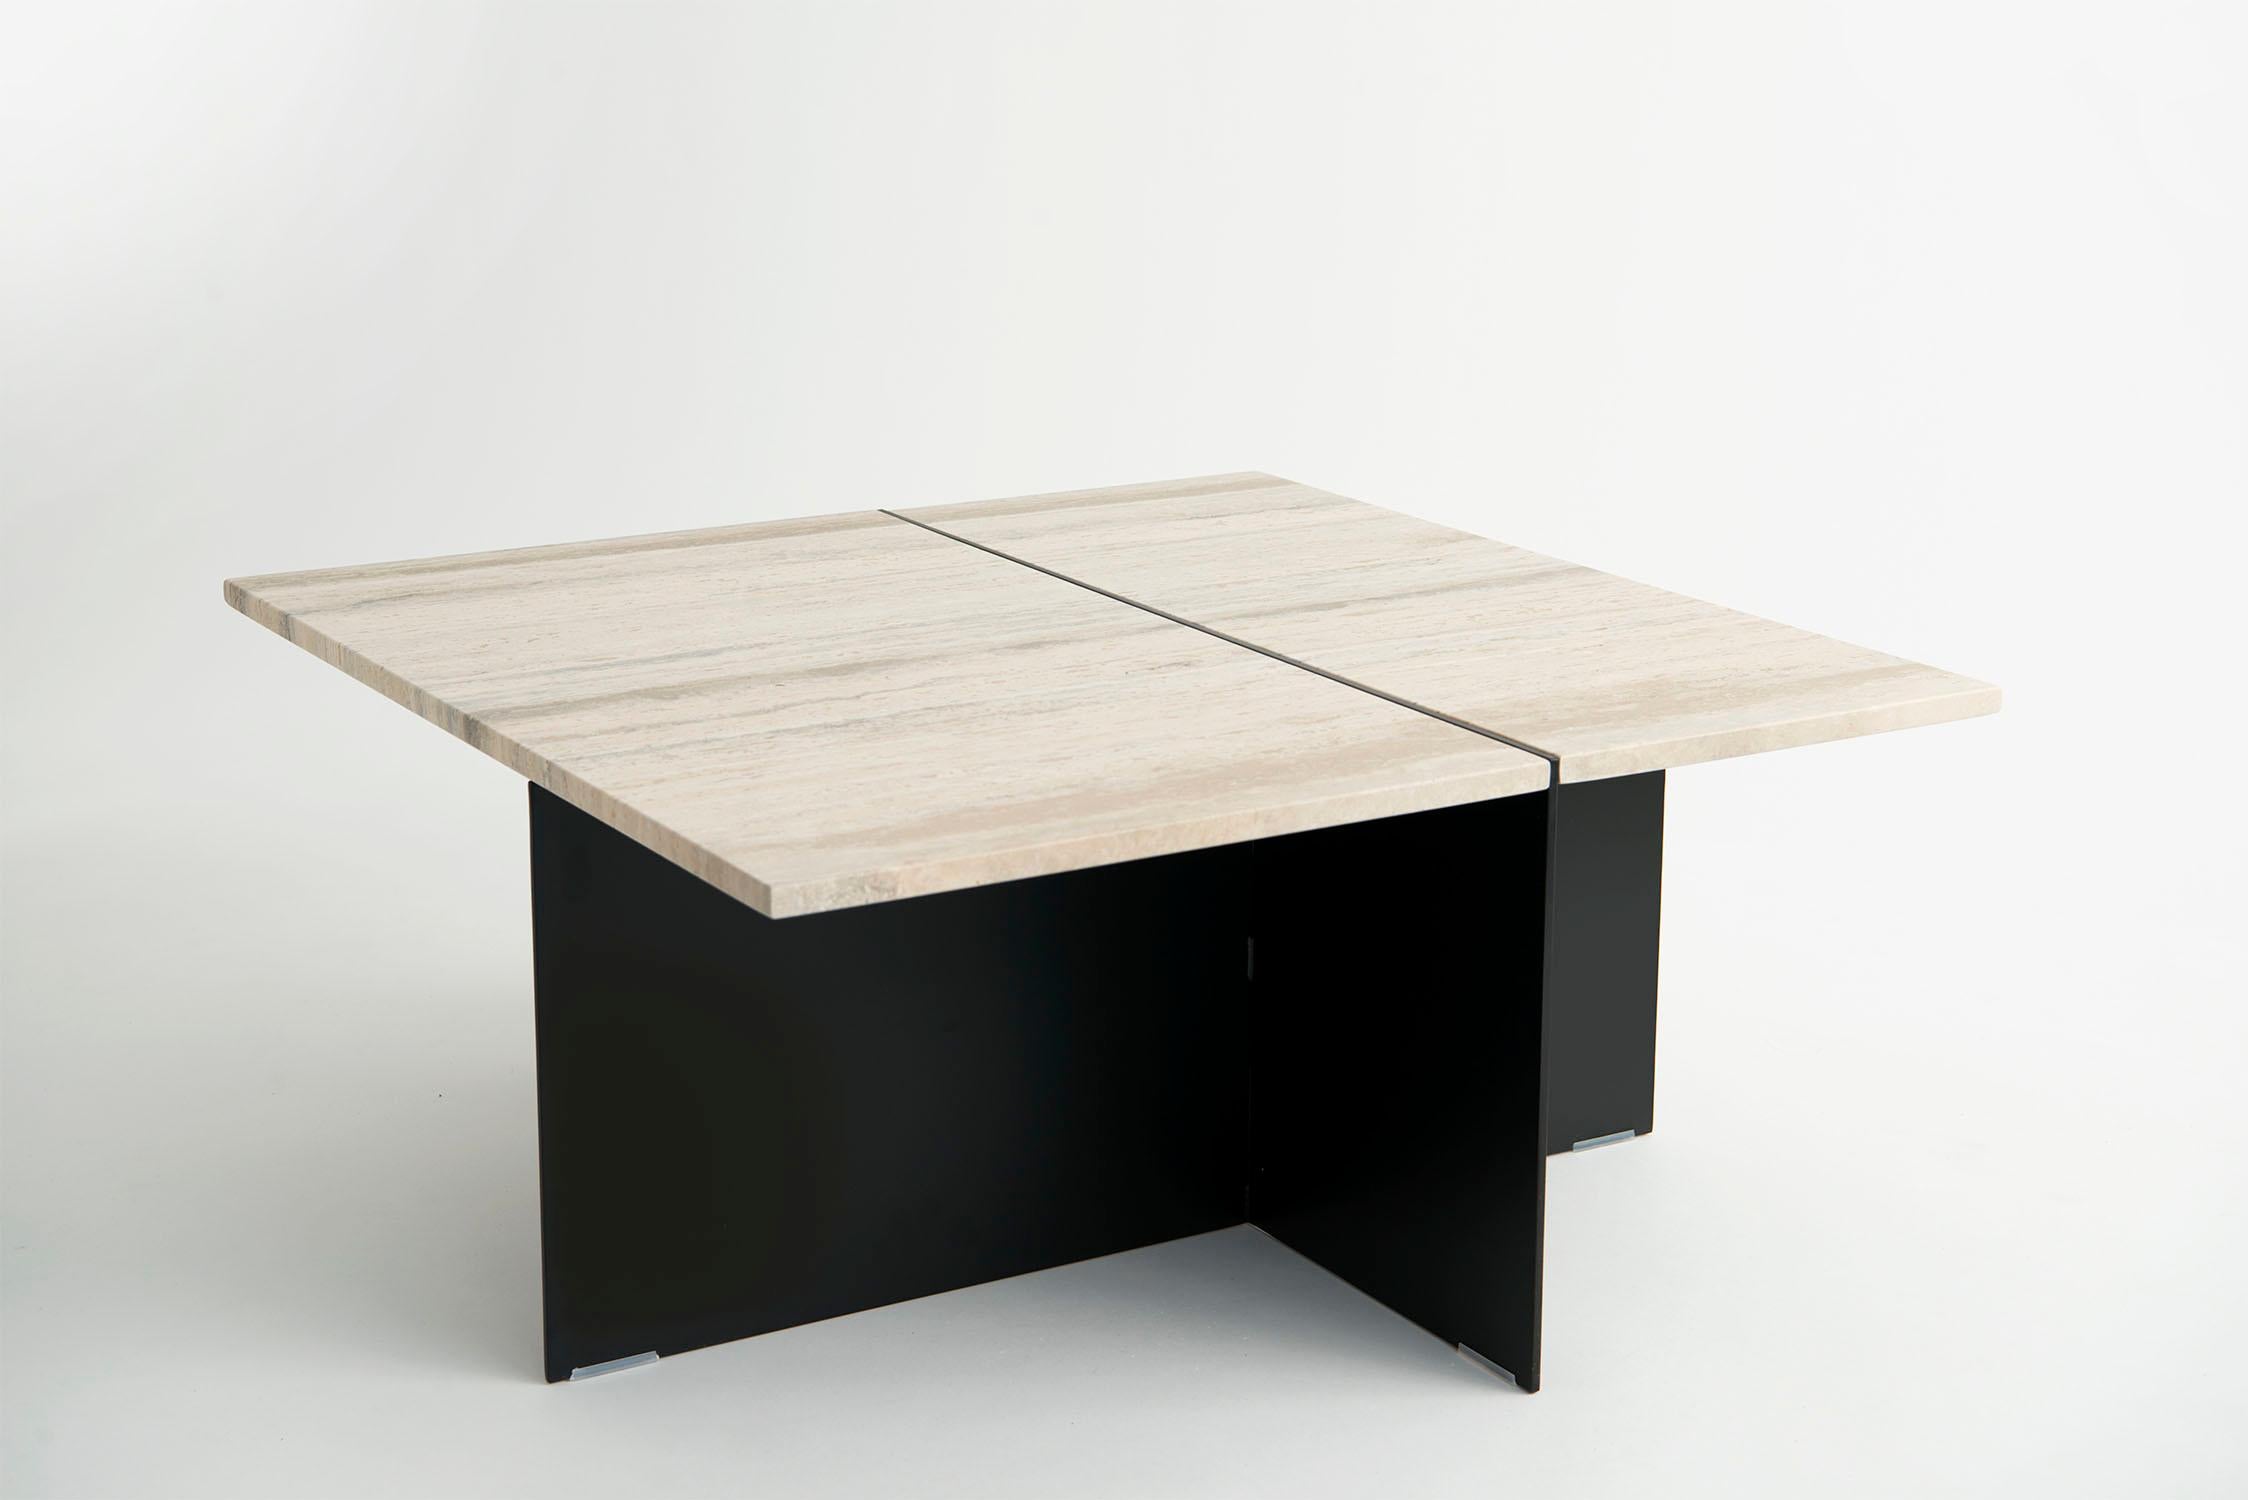 Listed price is for the Division Coffee Table- Square coffee table with either a travertine, white carrara, or negro marquna top, and Flat Black or Flat White powder coat base. 

Collection of architecturally inspired side and coffee tables,